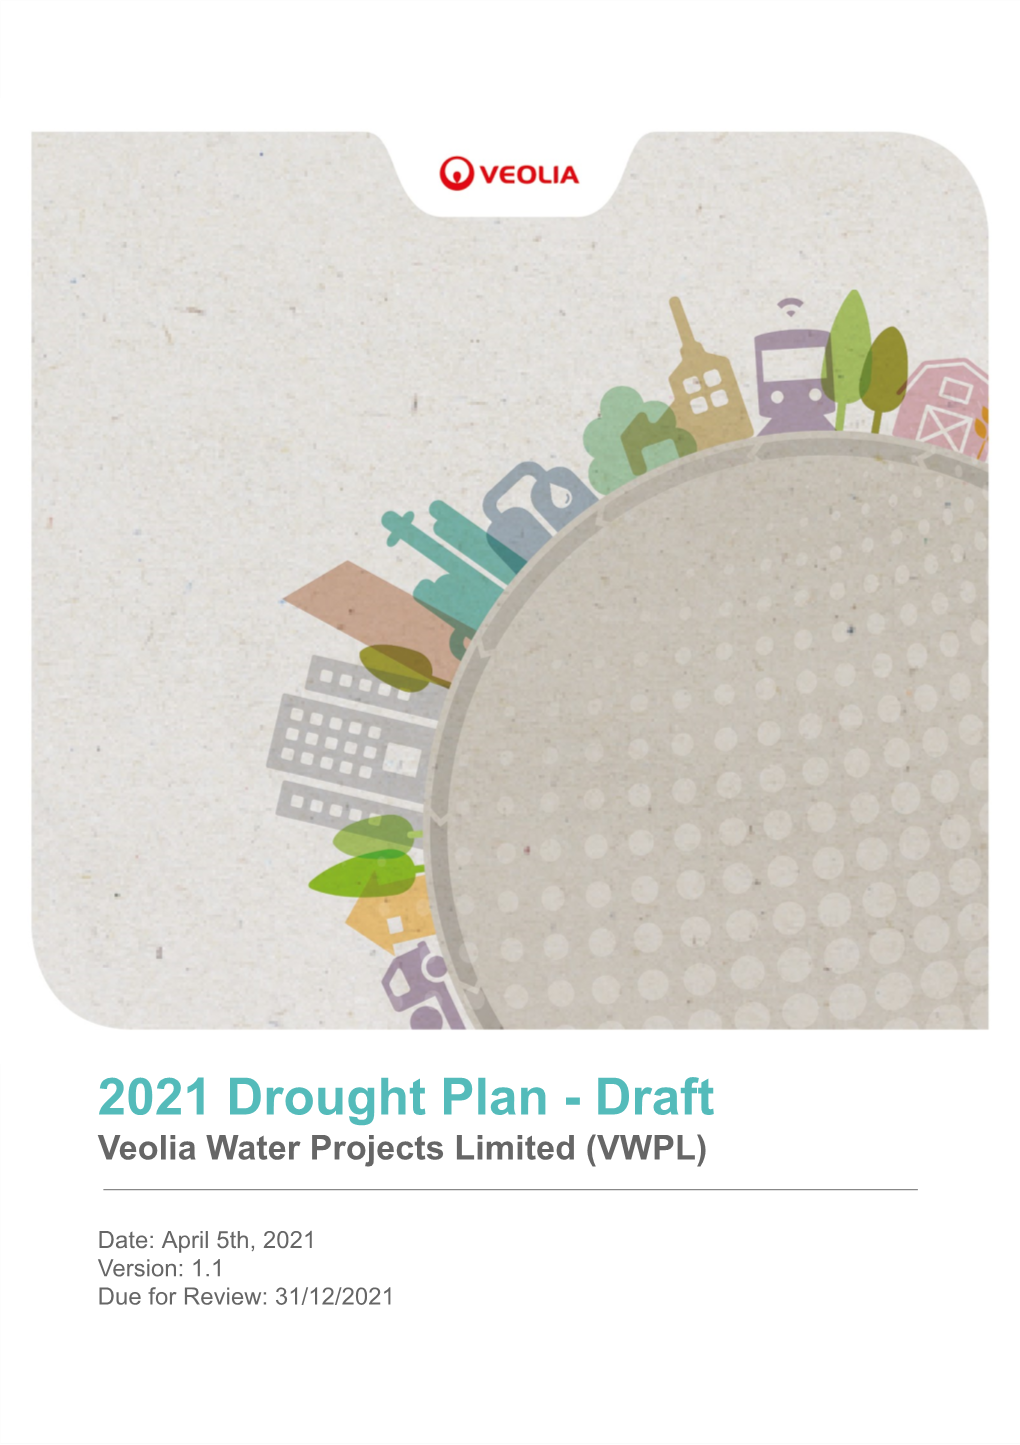 2021 Drought Plan - Draft Veolia Water Projects Limited (VWPL)